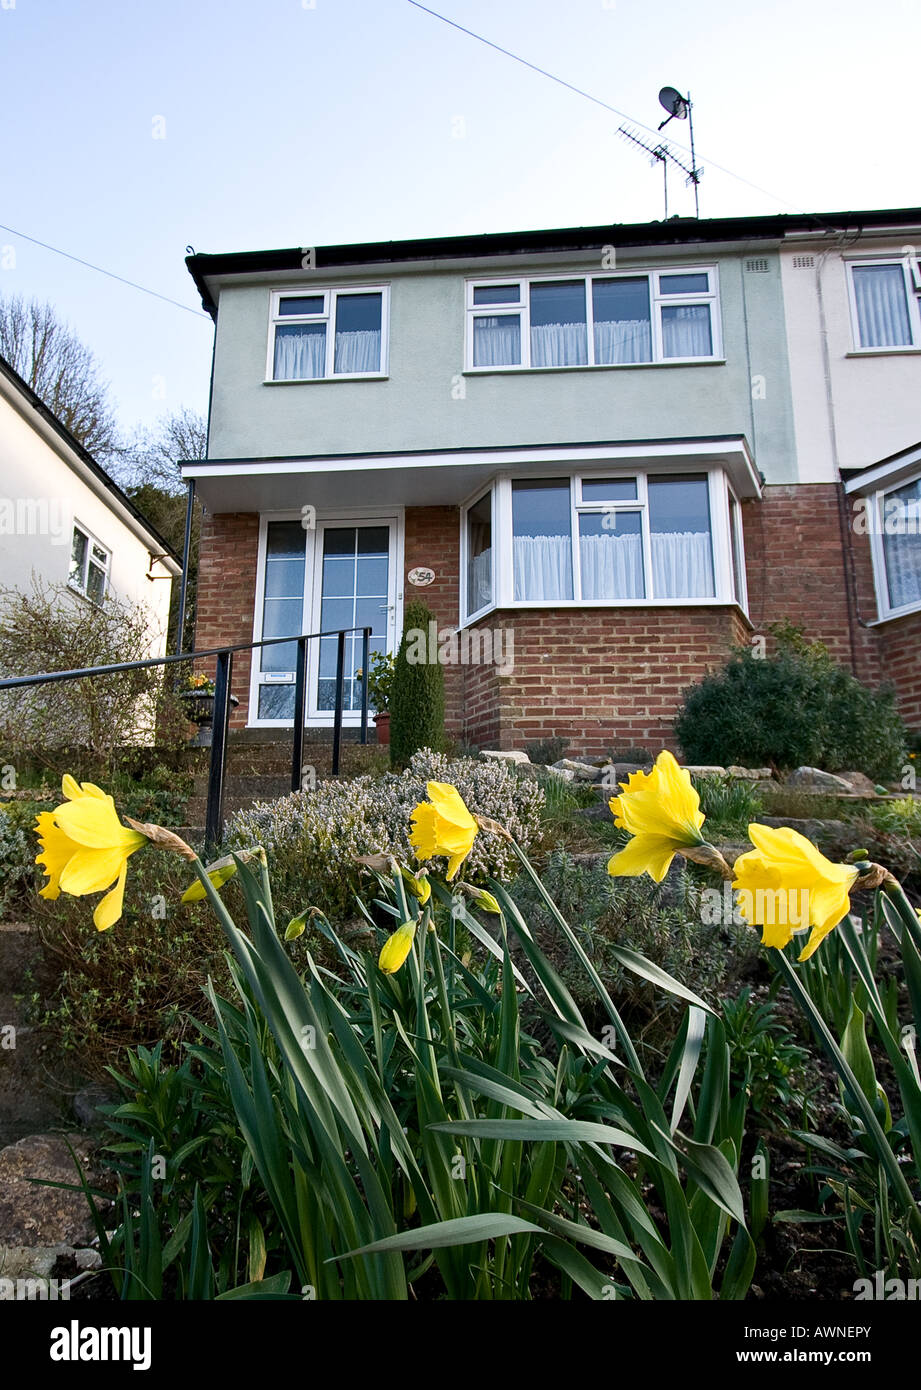 typical semi-detached british house with daffodils in foreground Stock Photo